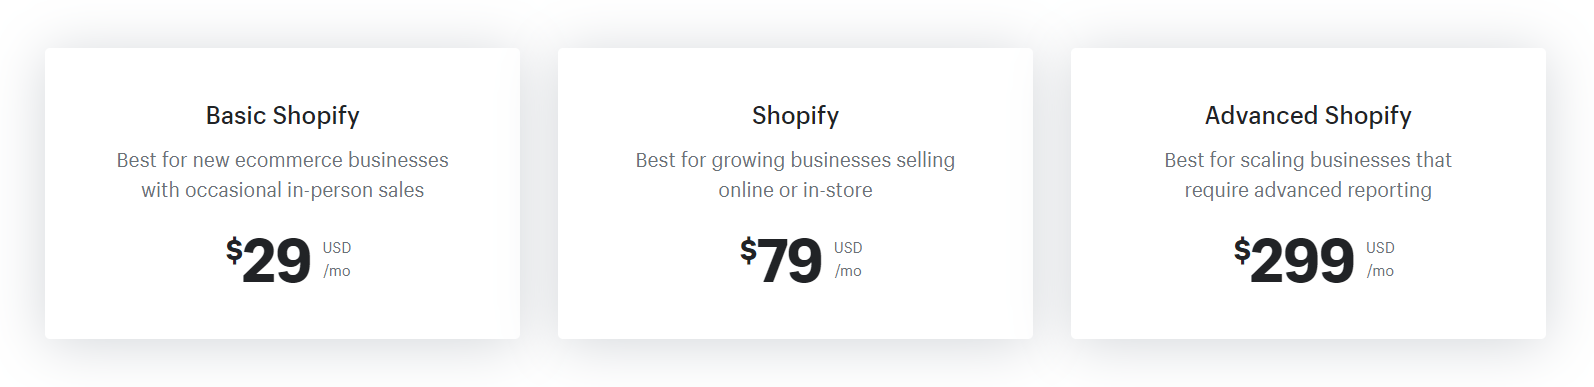 shopify pricing 